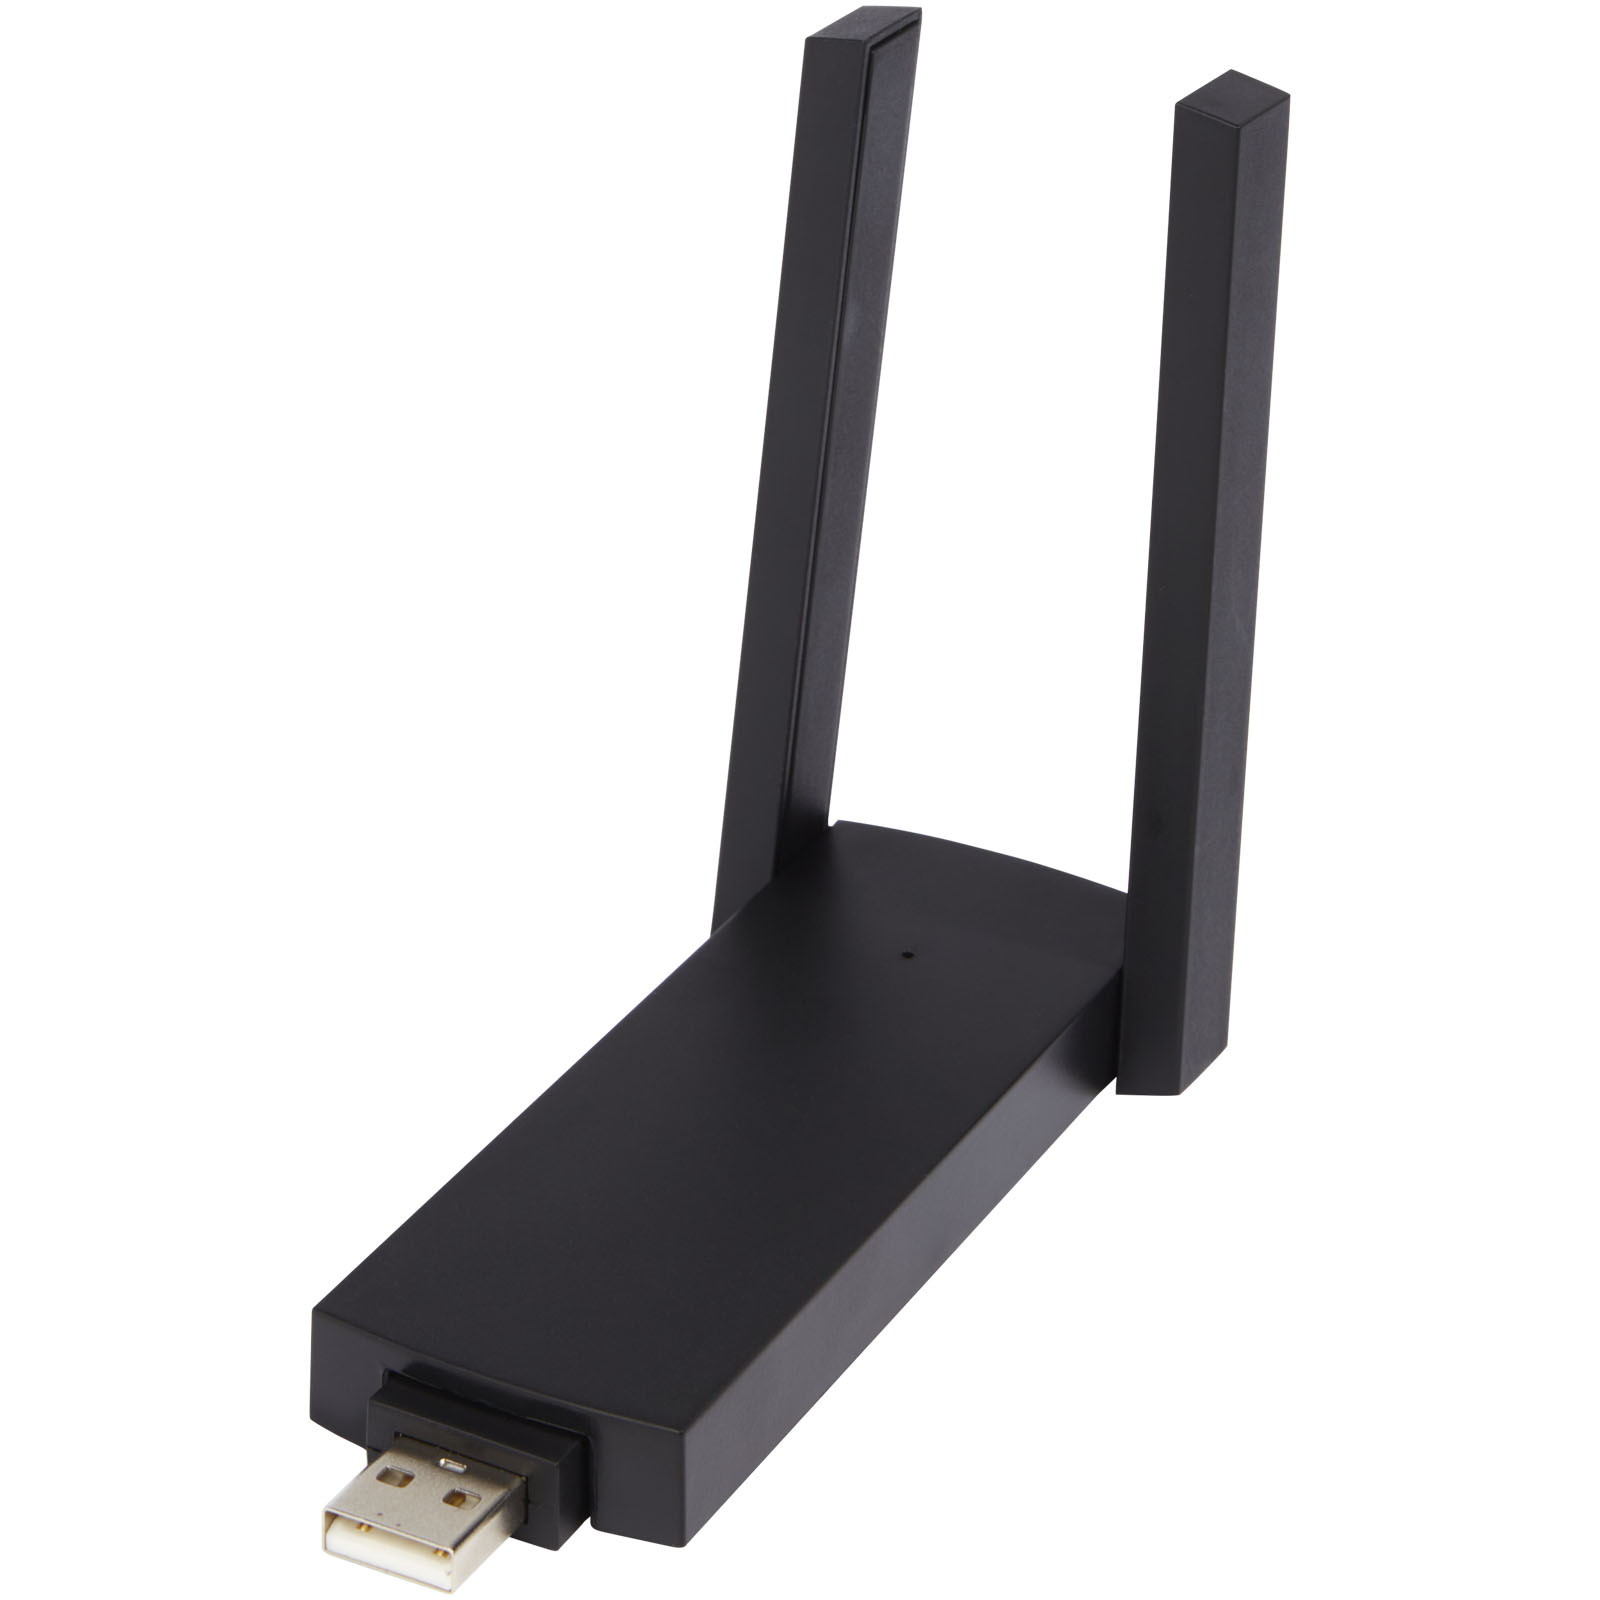 Advertising Computer Accessories - ADAPT single band Wi-Fi extender